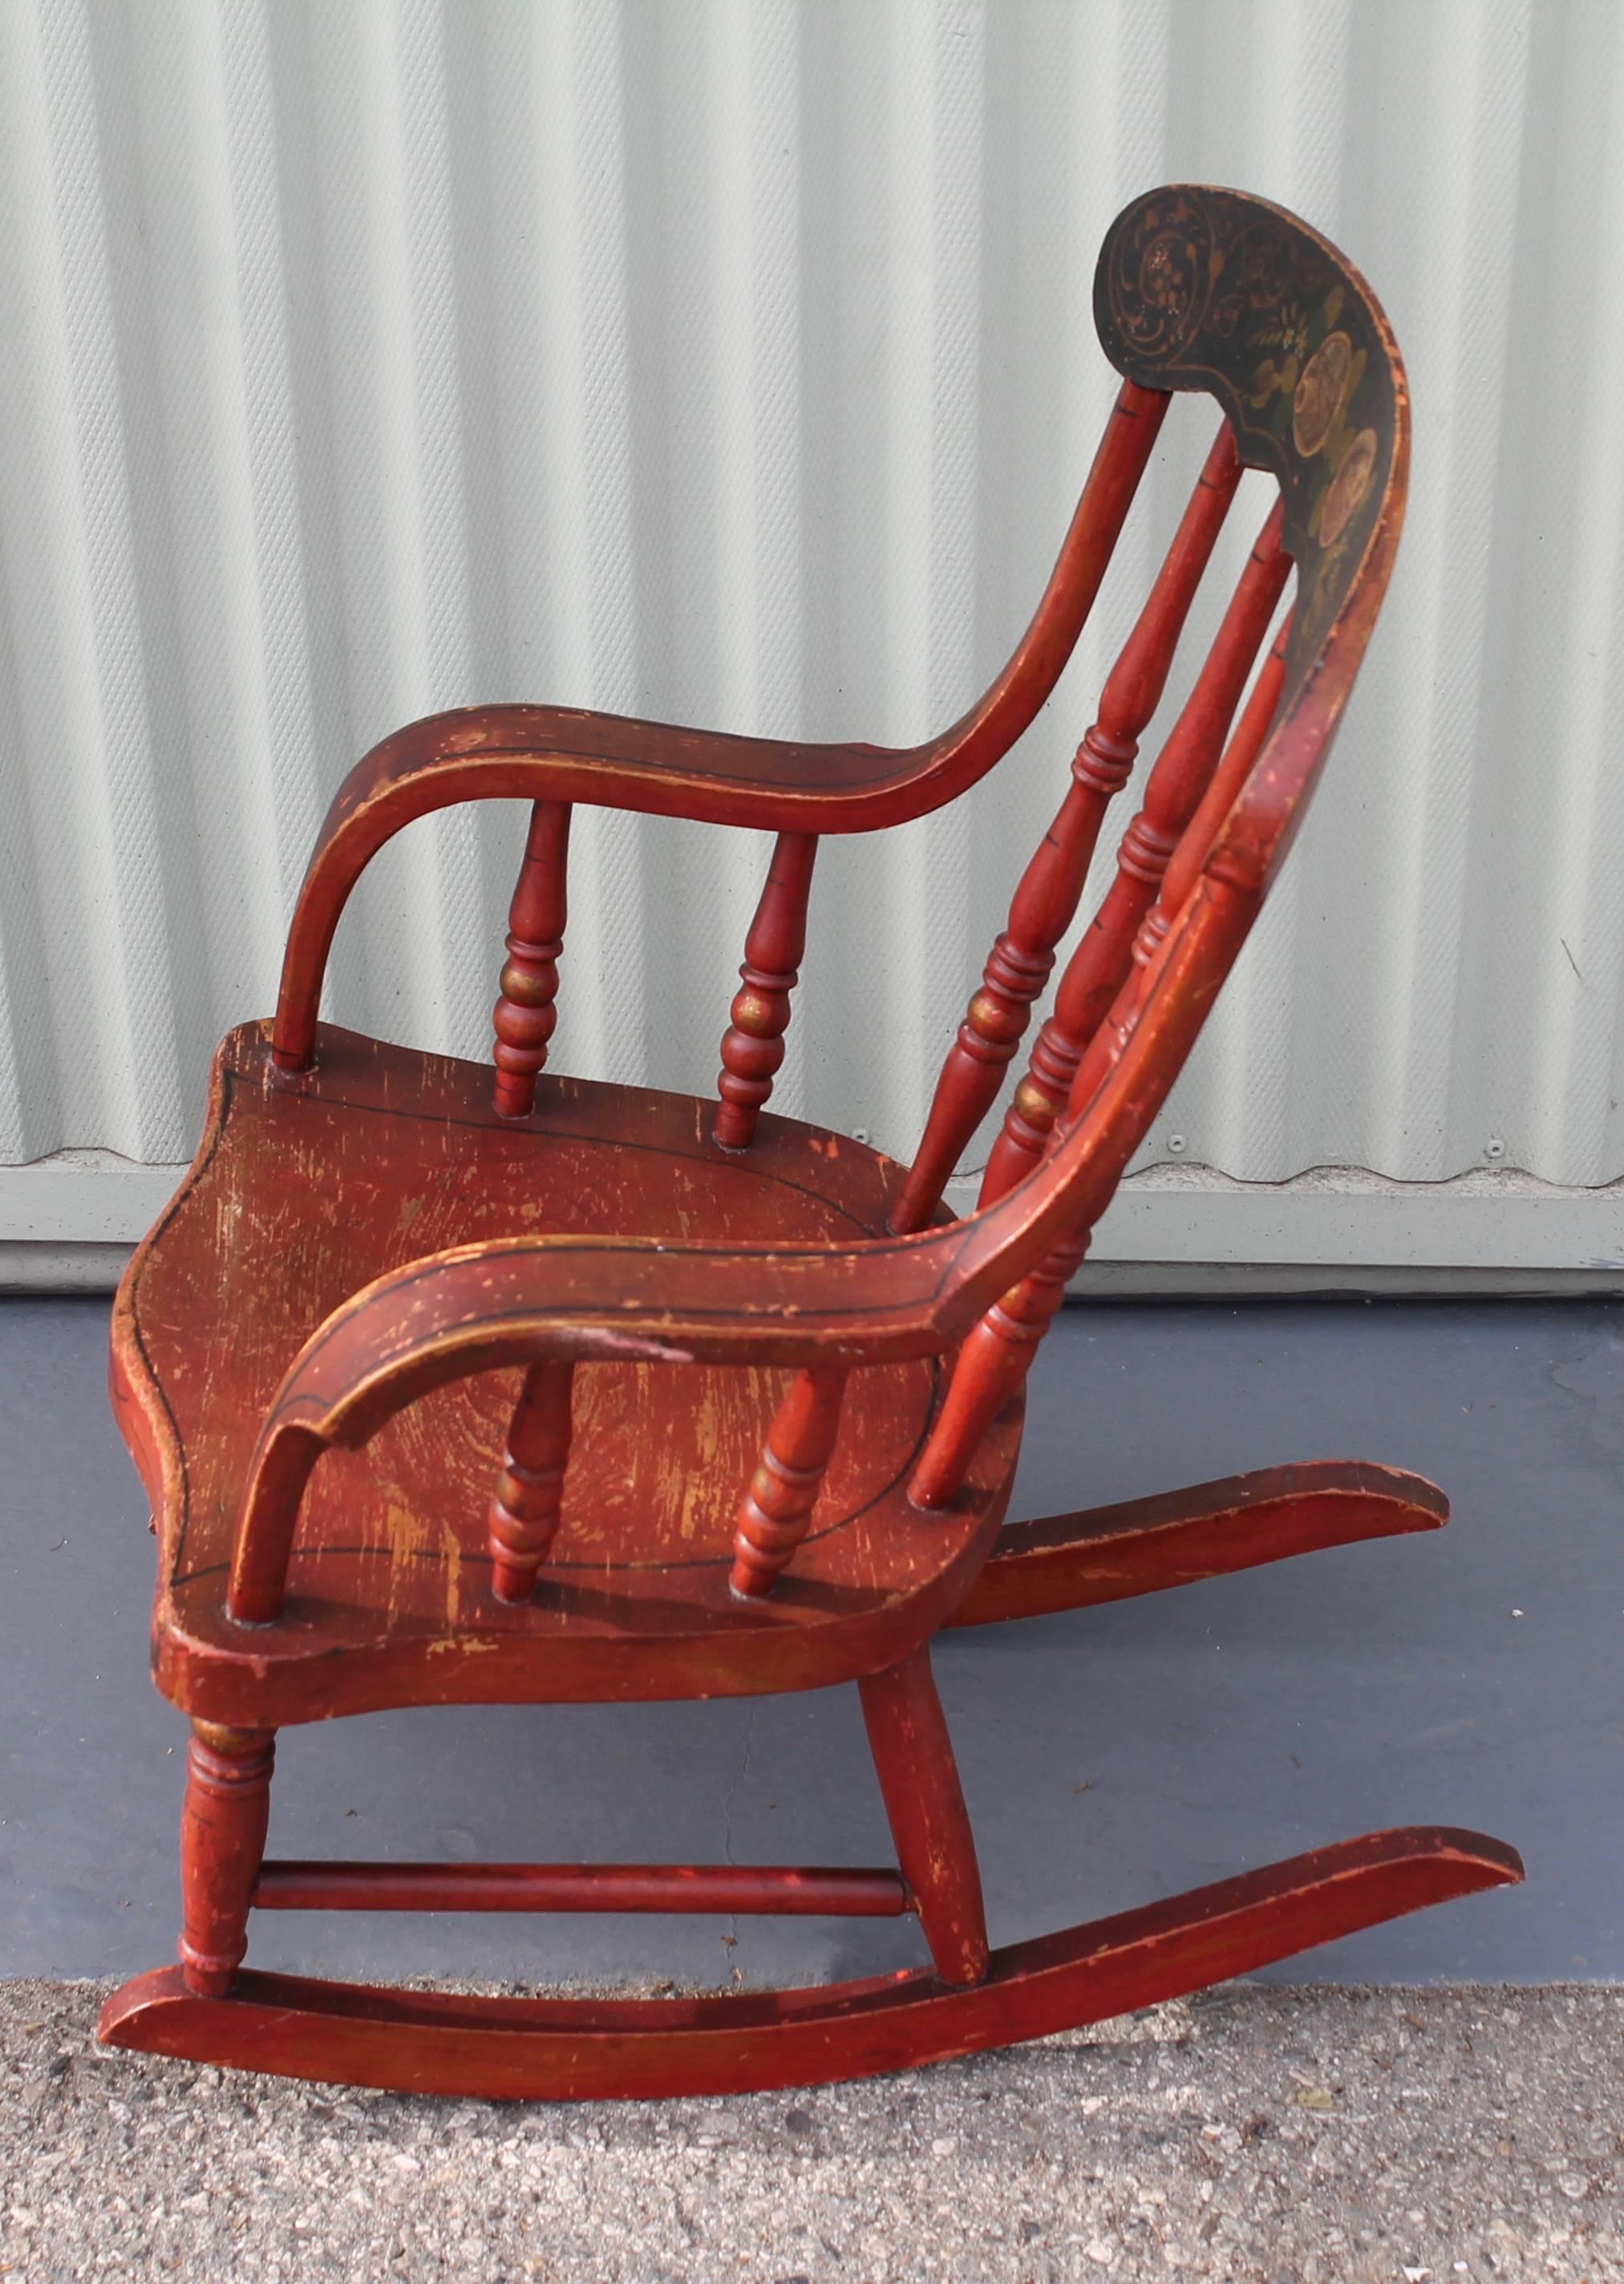 Pine 19th Century Original Red Paint Decorated Child's Rocking Chair